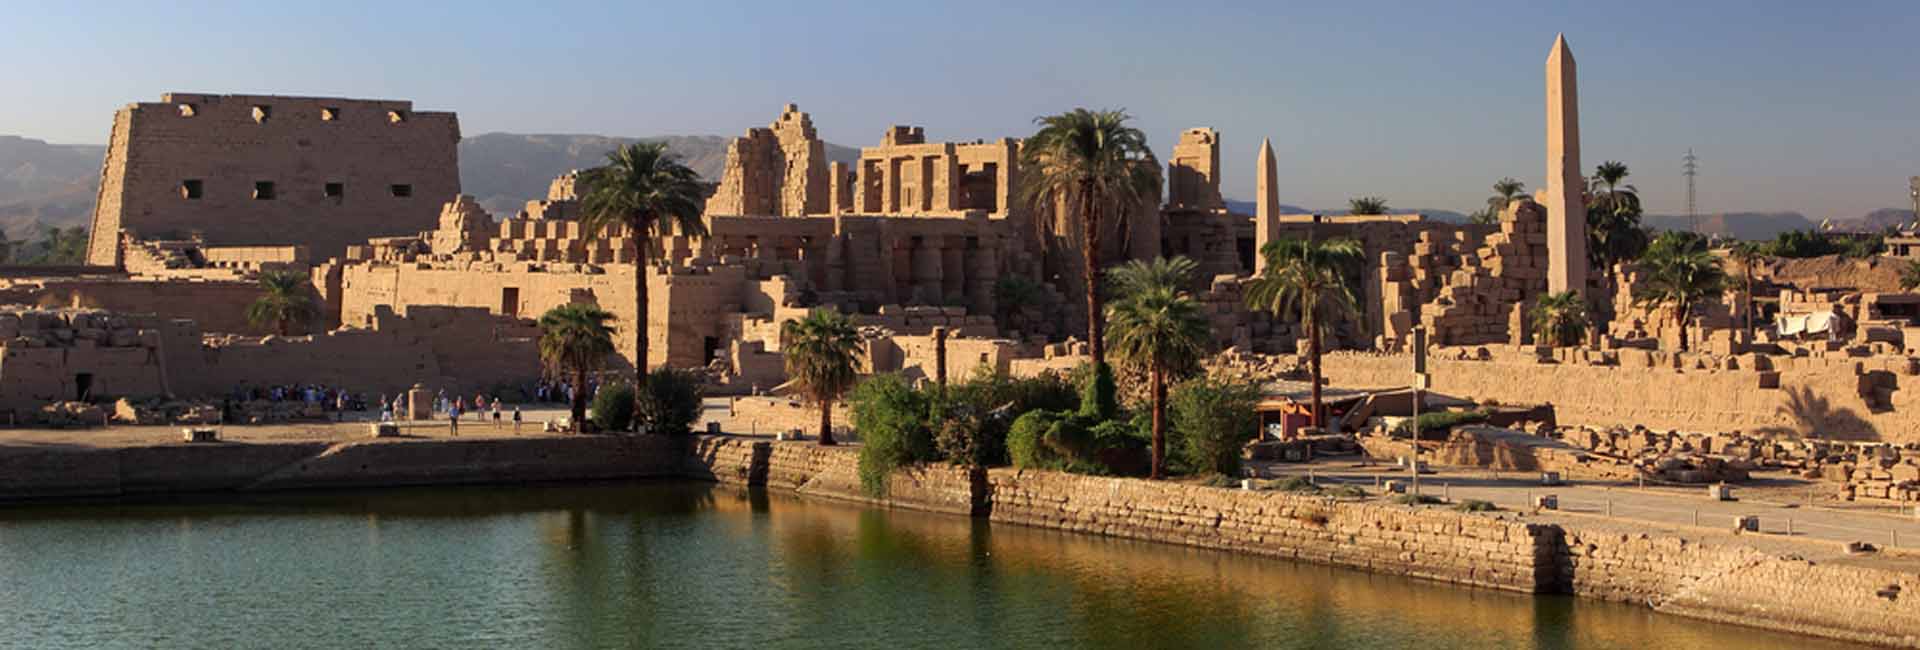 Overnight Trip to Luxor from Safaga Port